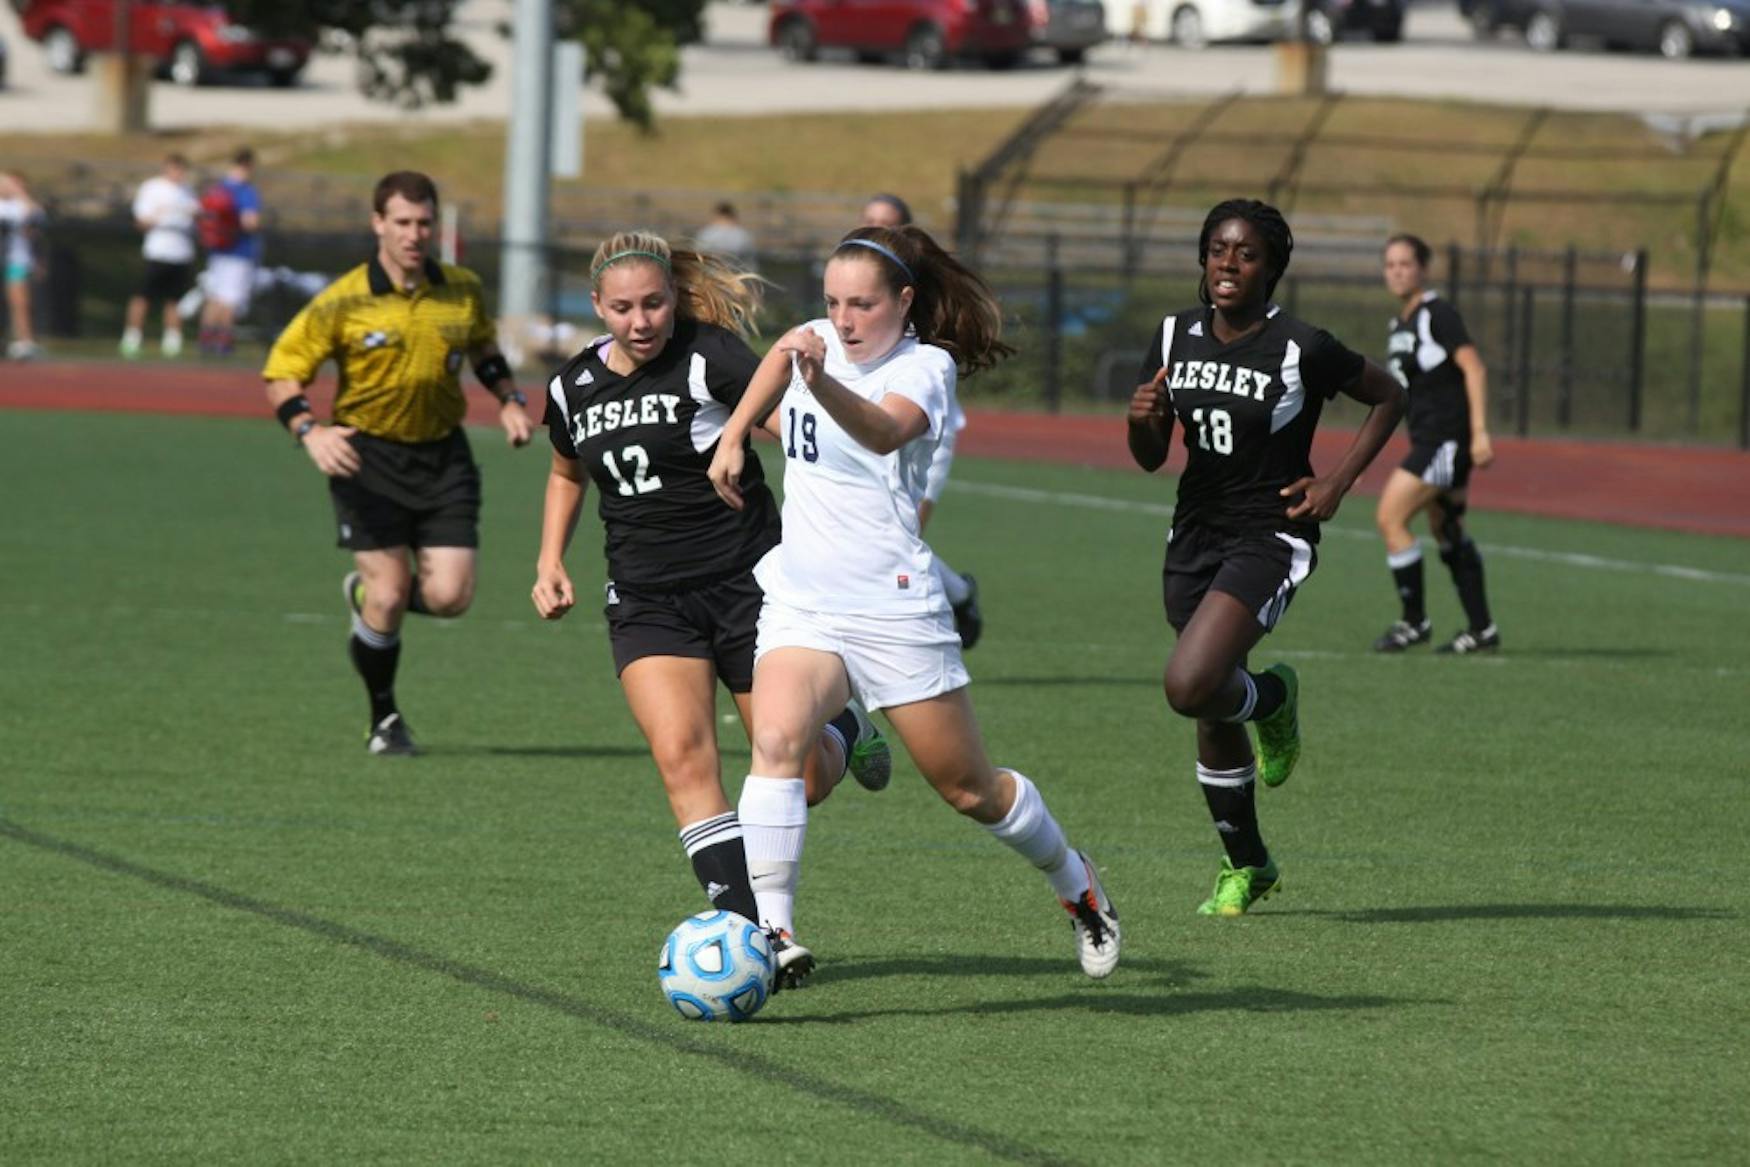 QUICK PASS: Forward Samantha Schwartz ’18 (right) sprints ahead of a Lesley College defender in the team’s 1-0 win on Sept. 23.